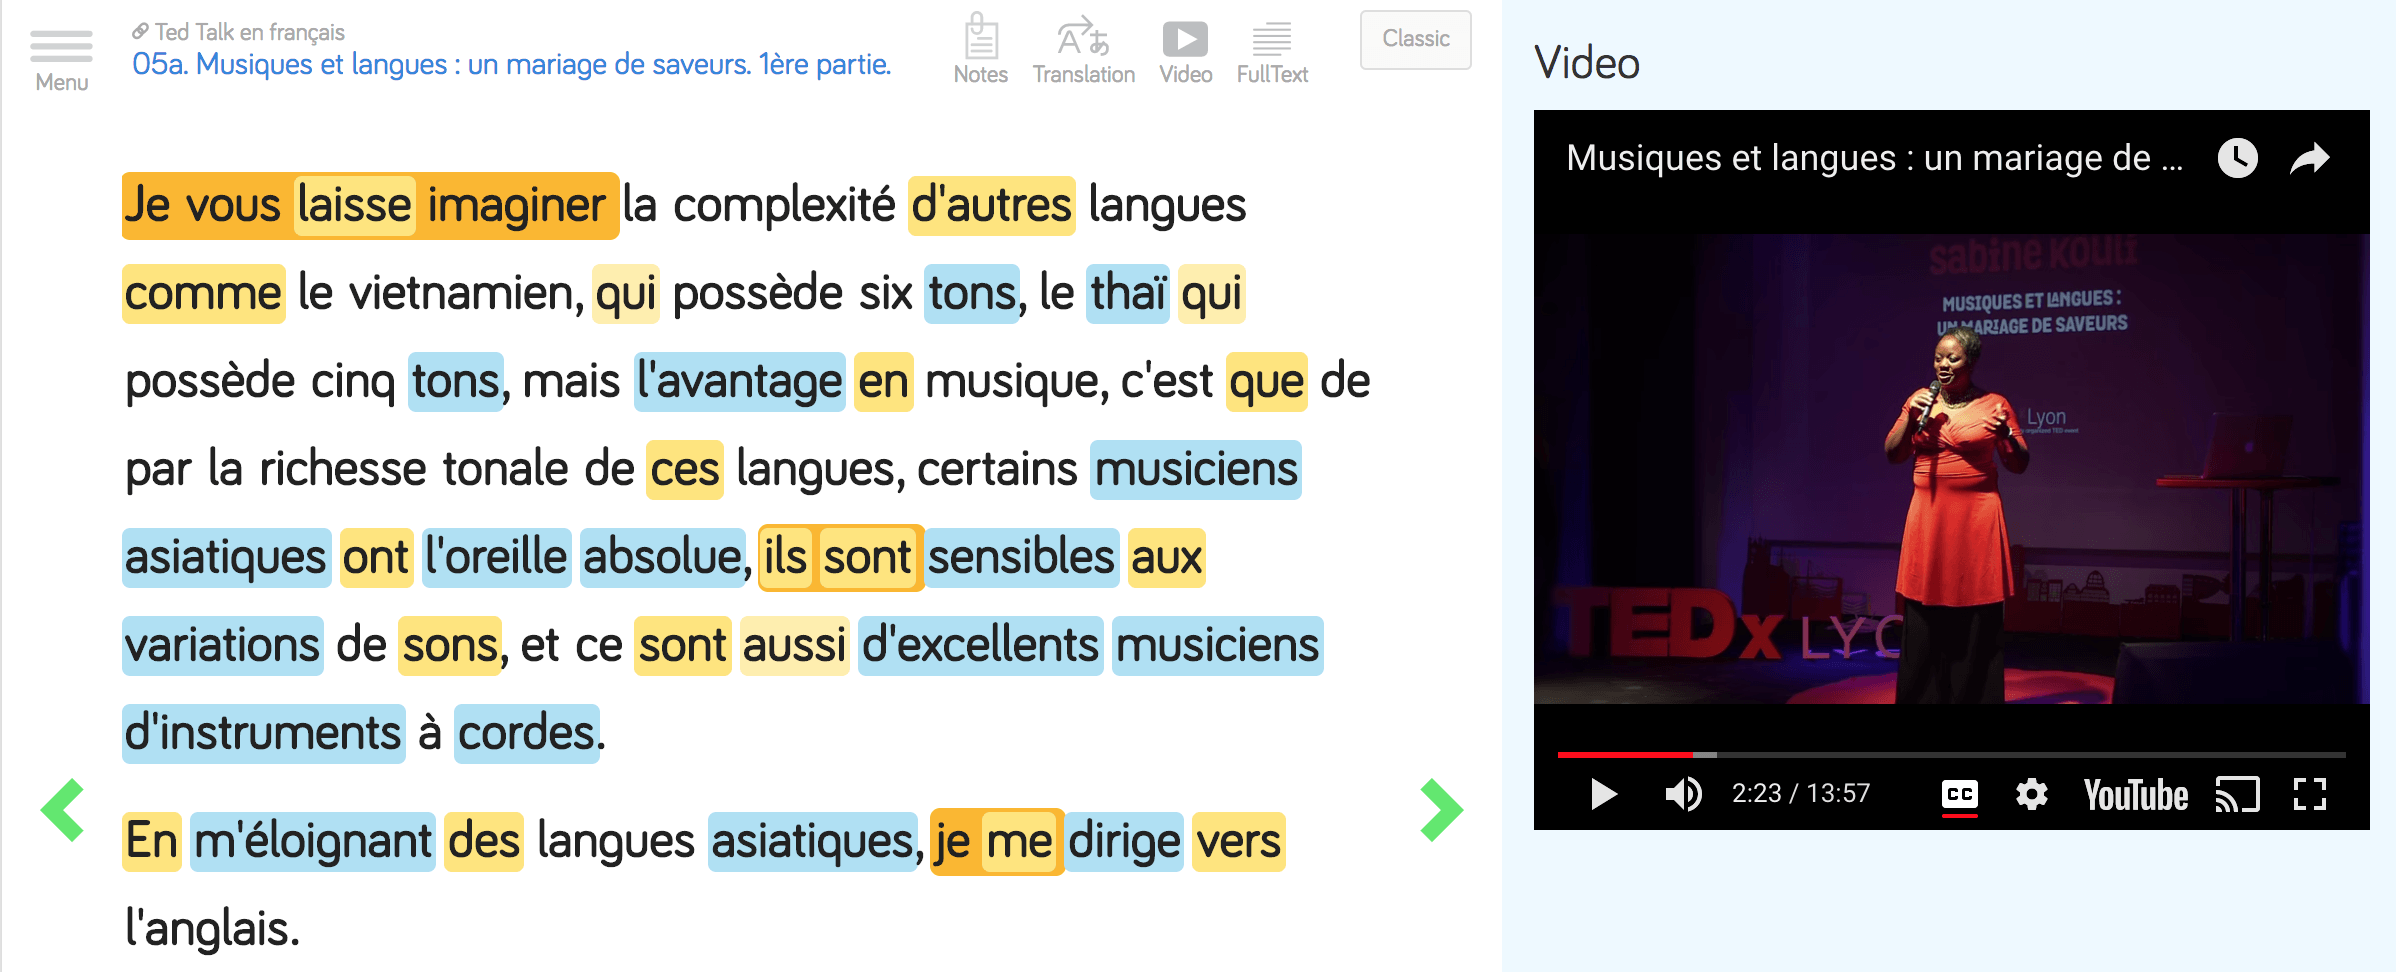 Learn French on LingQ